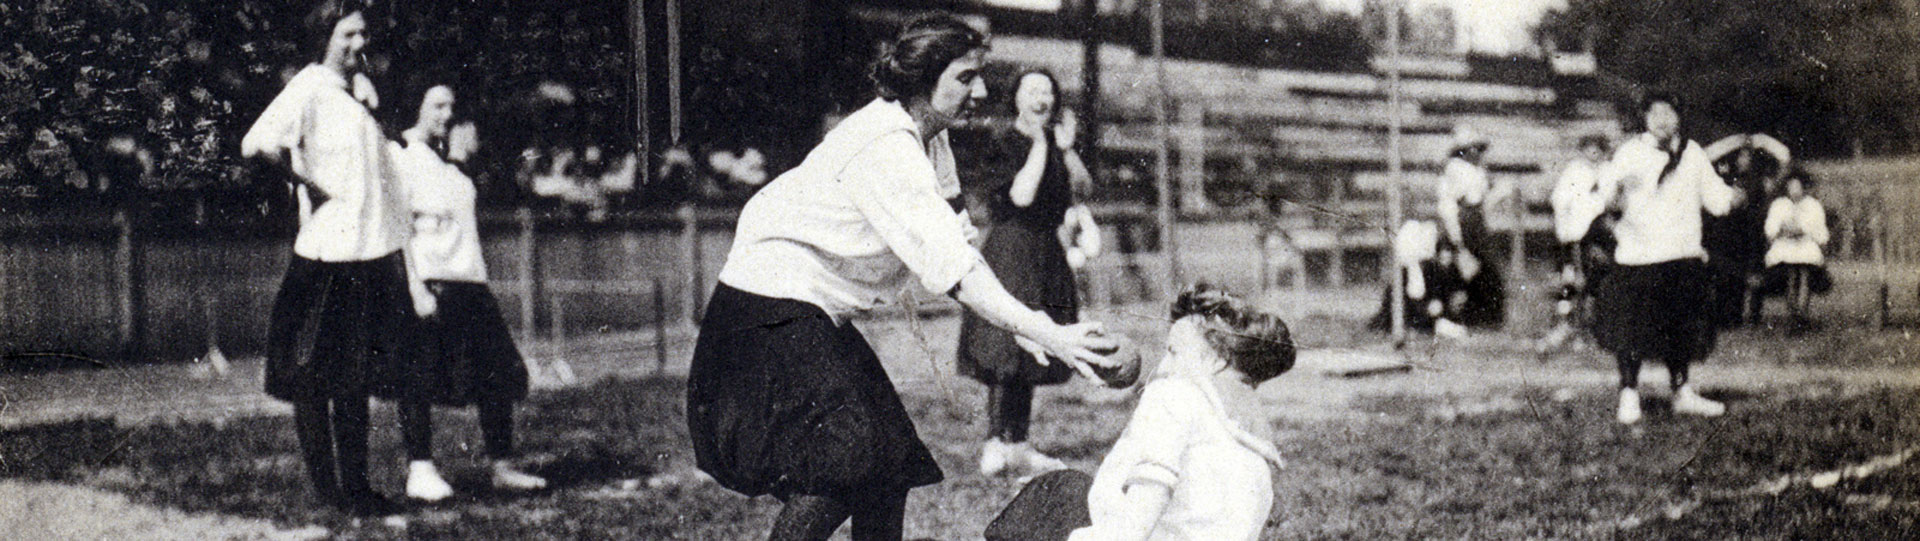 Photo of students playing ball from archives and special collections